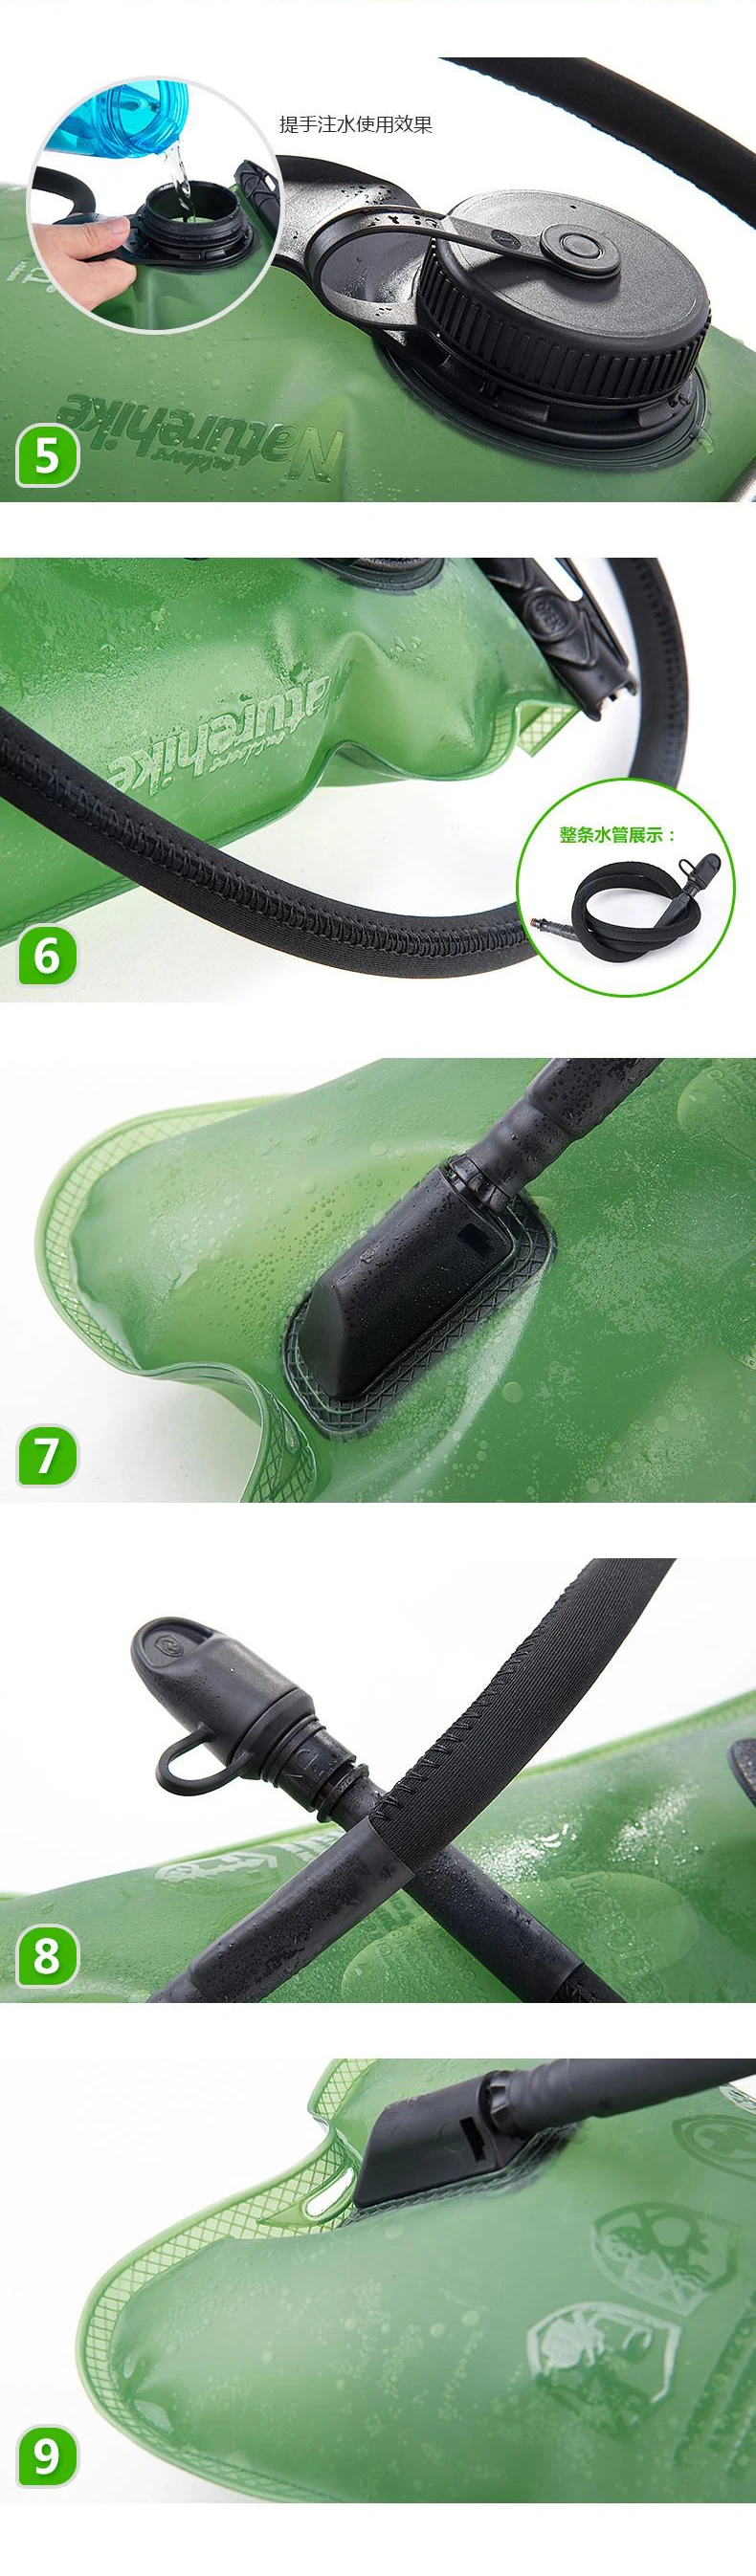 Naturehike high quality 3L PEVA Leakproof water reservoir water bladder hydration for Hiking Climbing Cycling Running